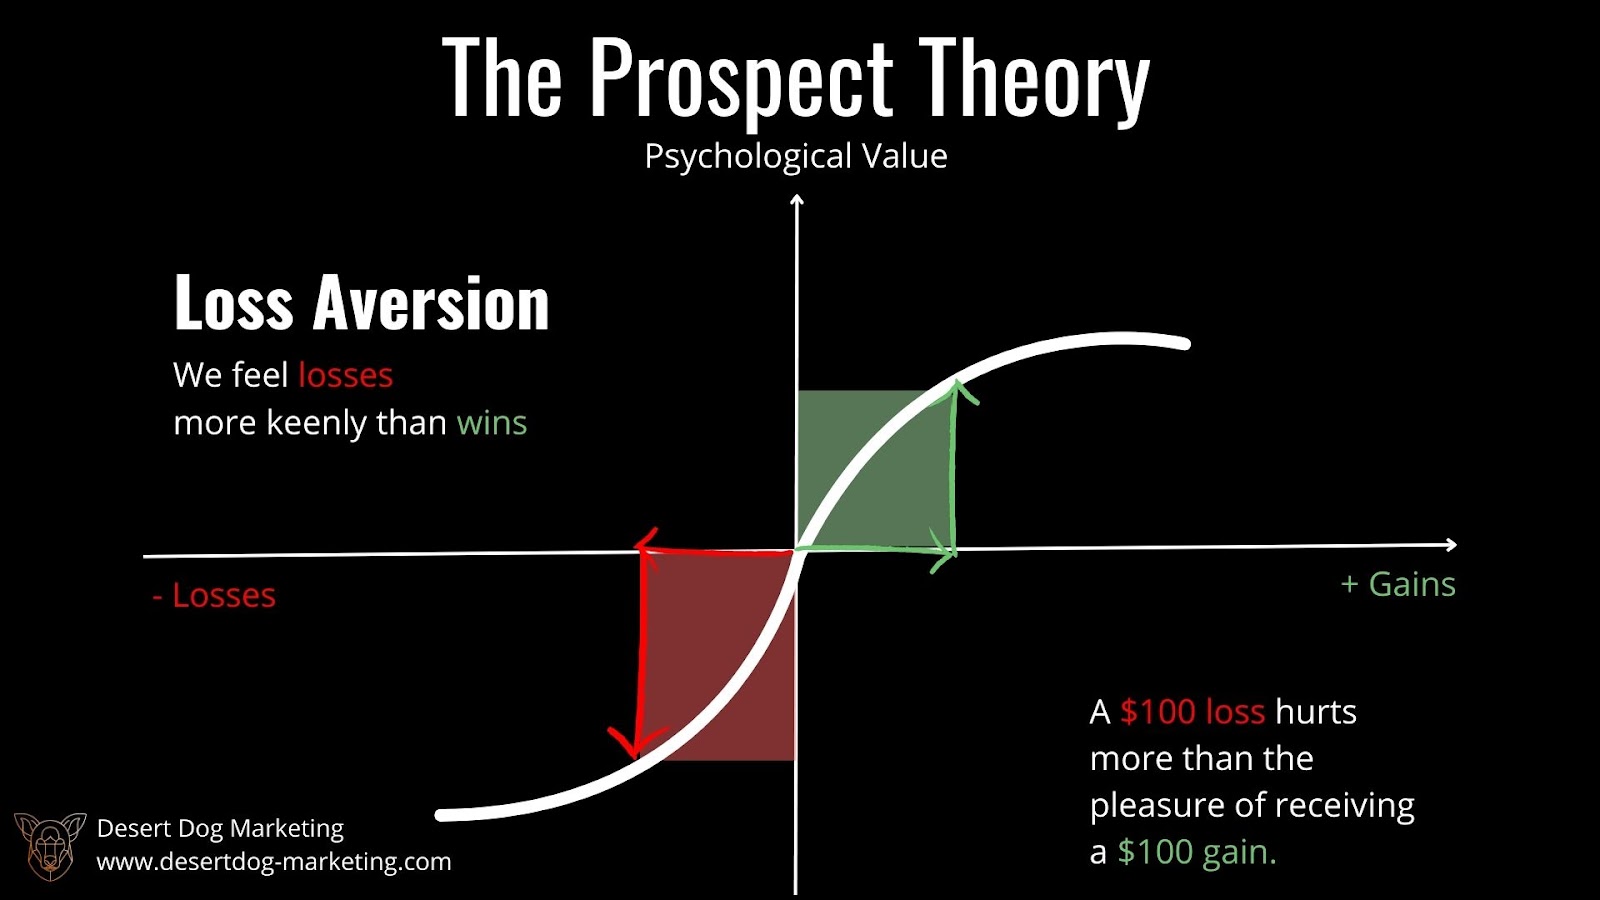 A diagram highlighting the prospect theory. It shows the psychological value in the y-axis and the gains and losses in the x-axis. It states that we feel losses more keenly than wins.